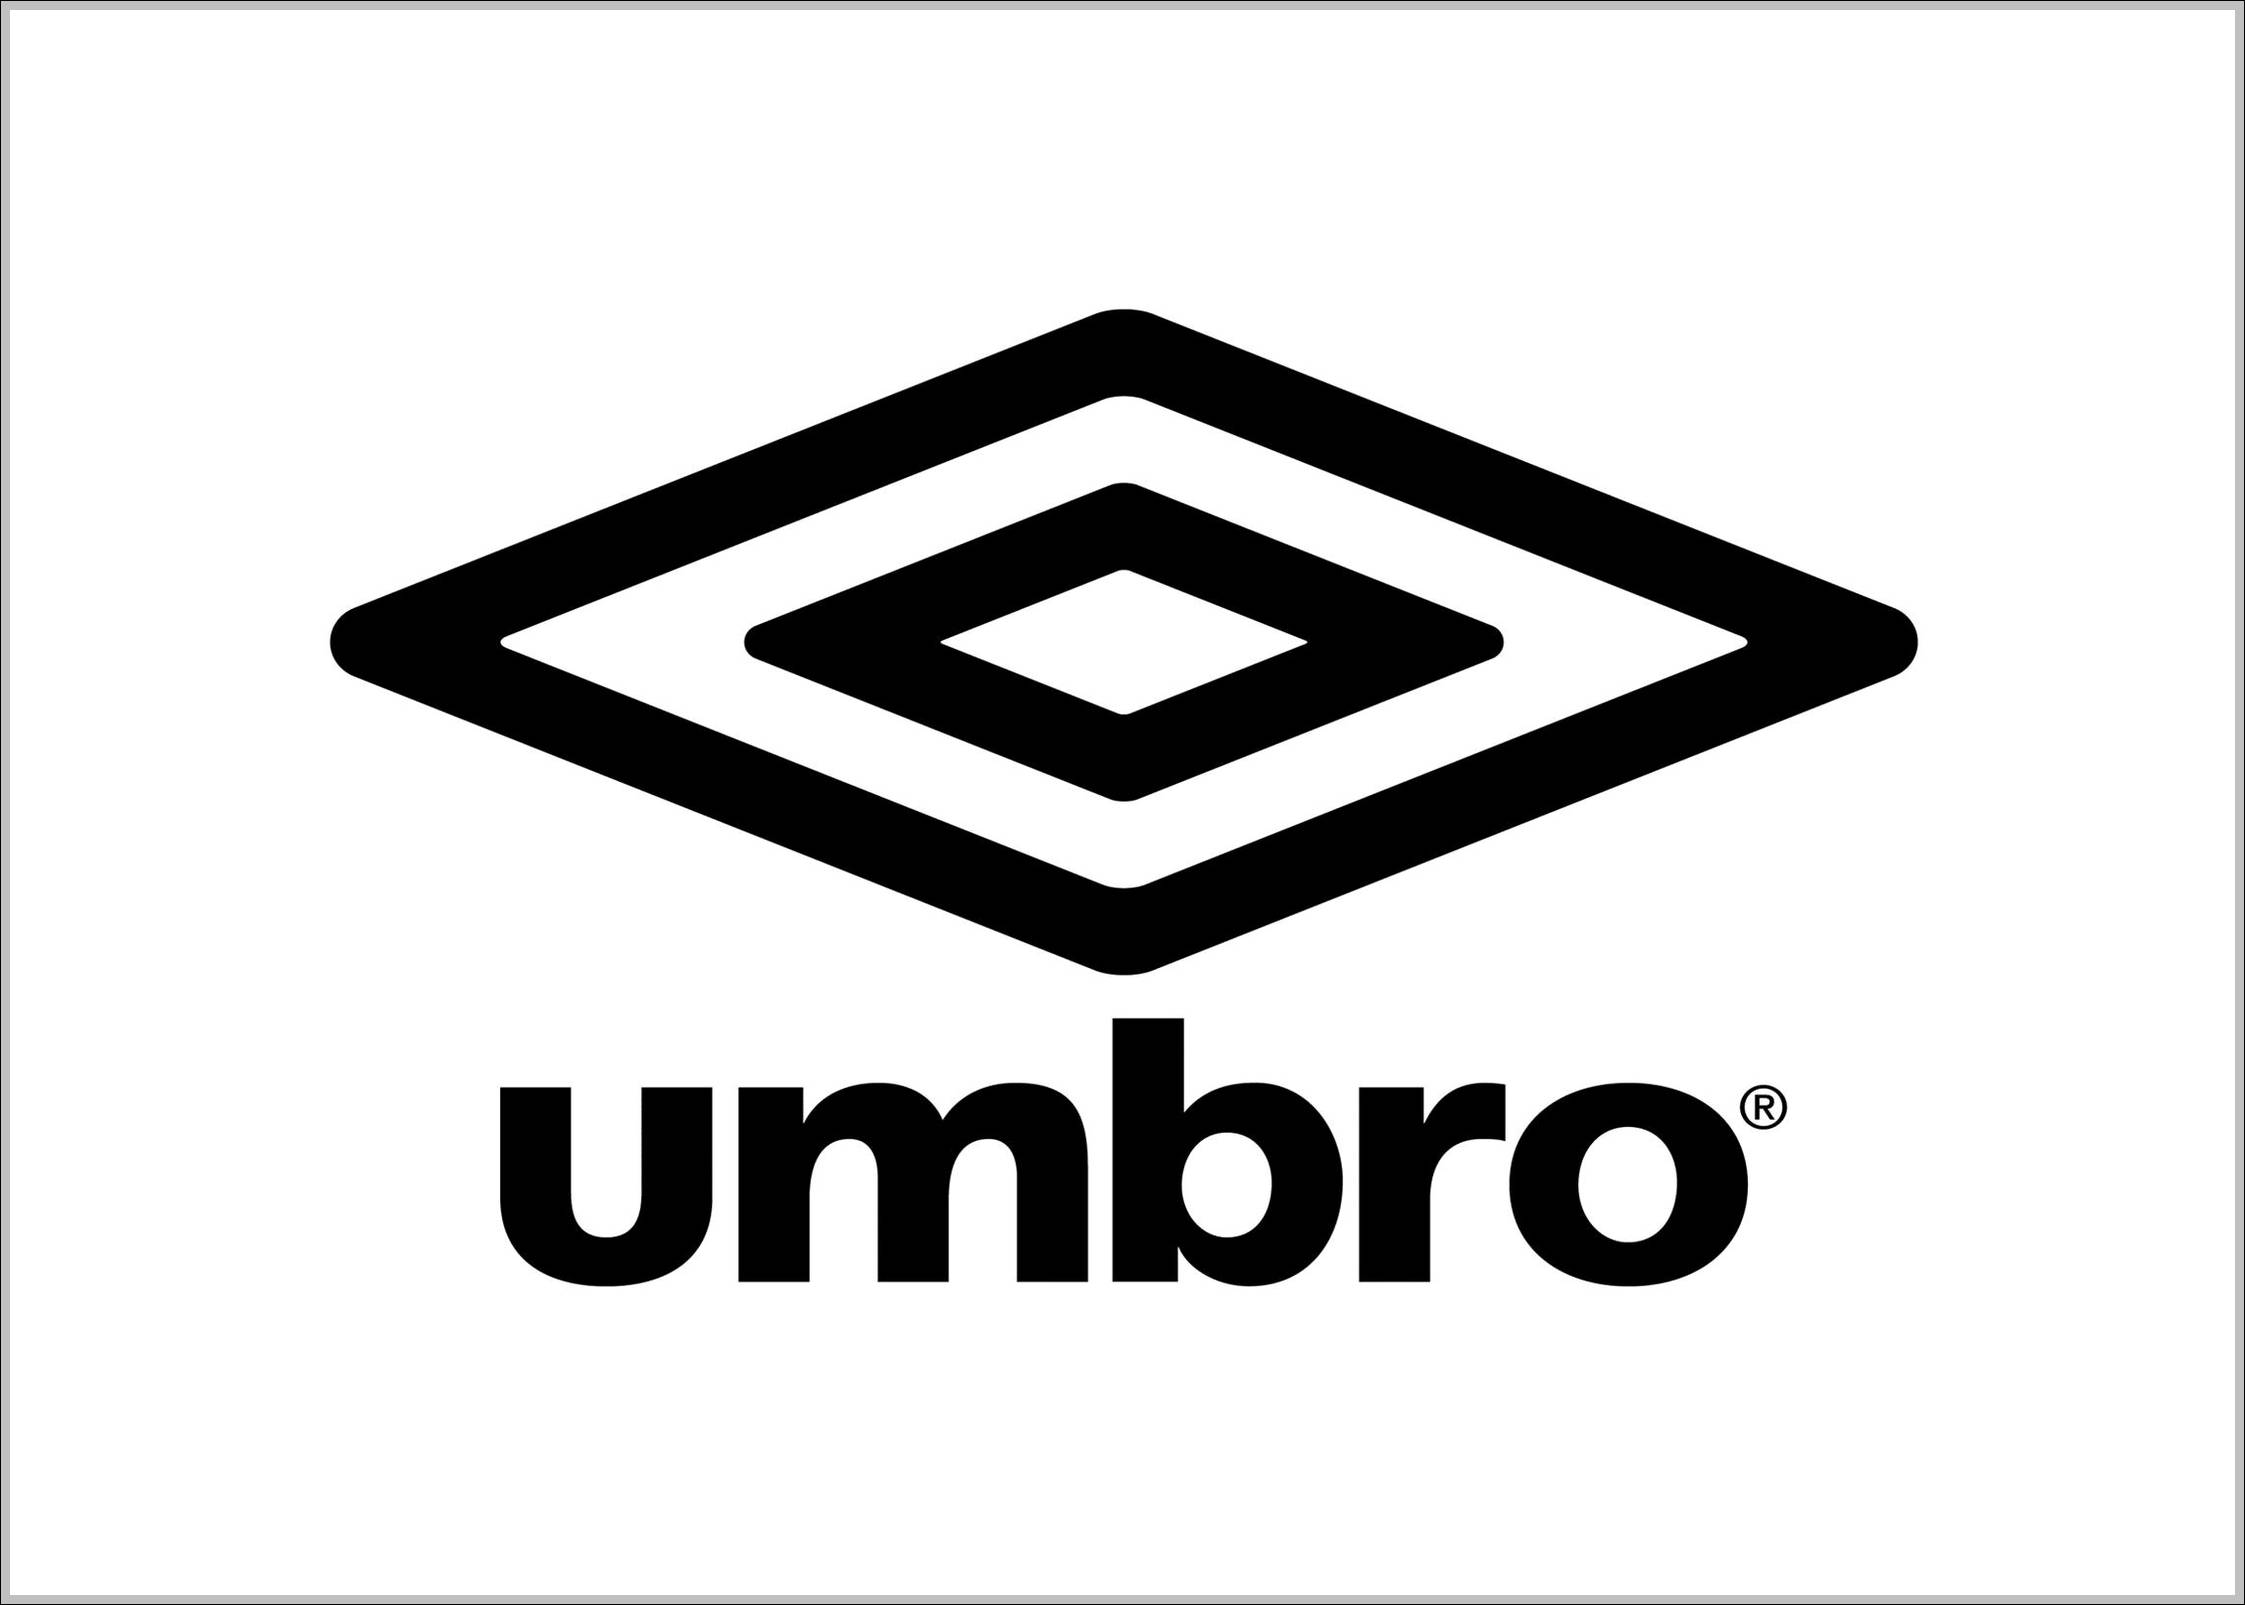 Umbro logo and sign